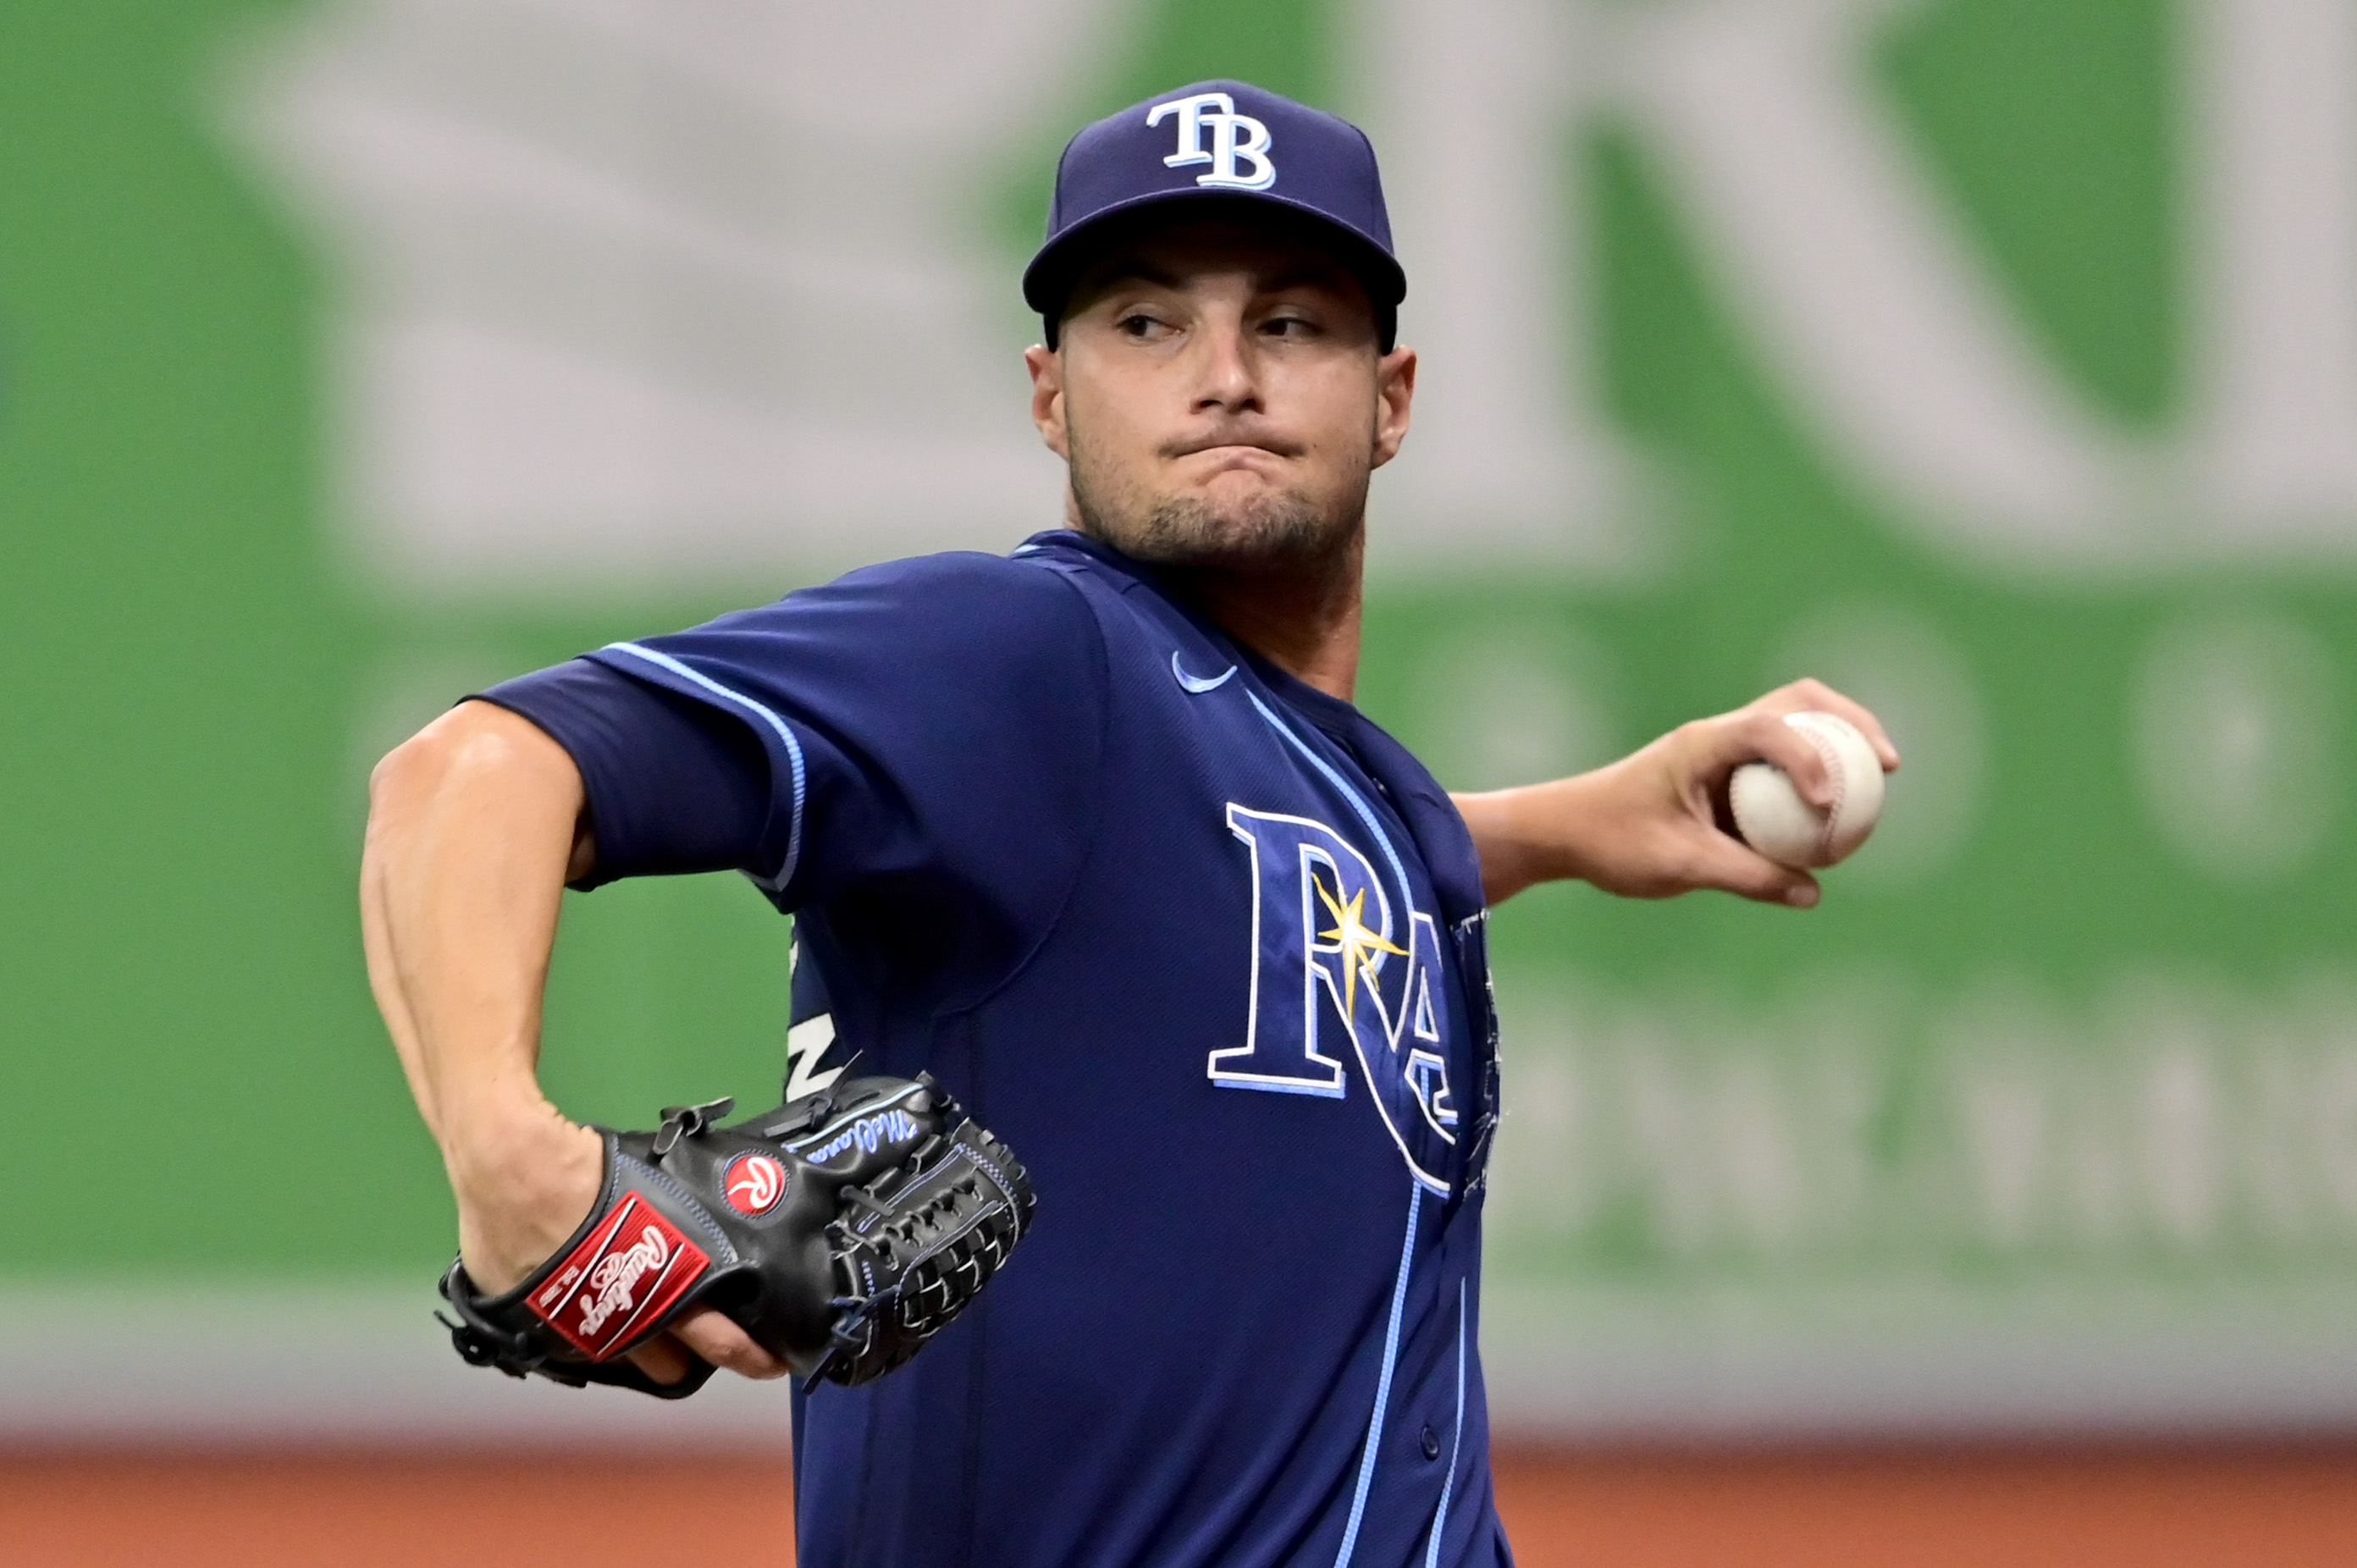 Tampa Bay Rays' Shane McClanahan Selected as American League's